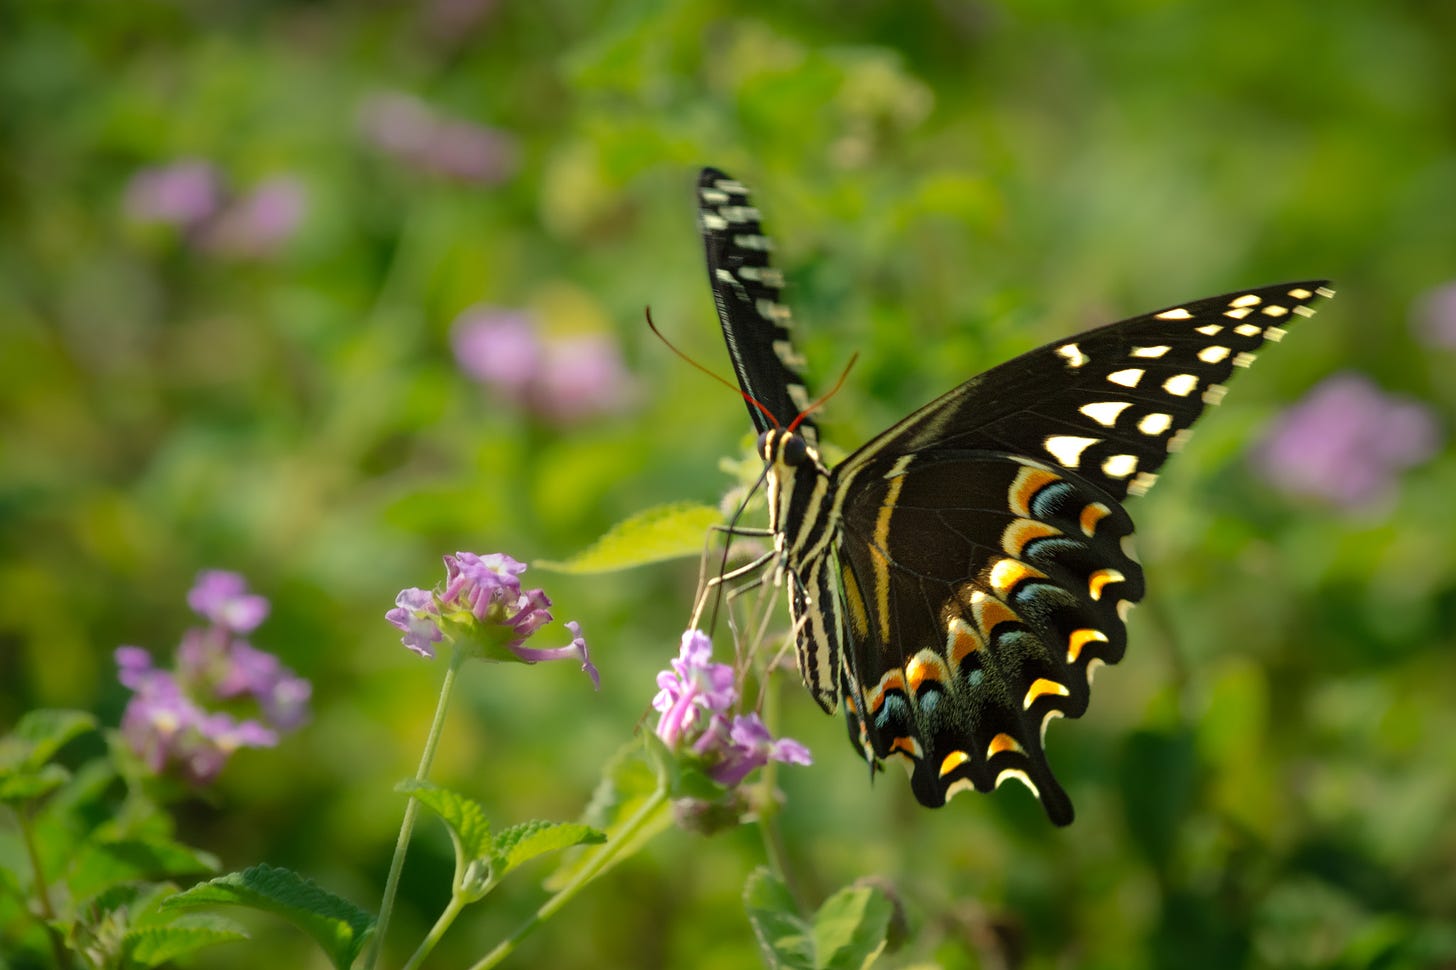 Swallowtail butterfly on a purple lantana bloom with the leaves and blossoms of the bush blurred in the background